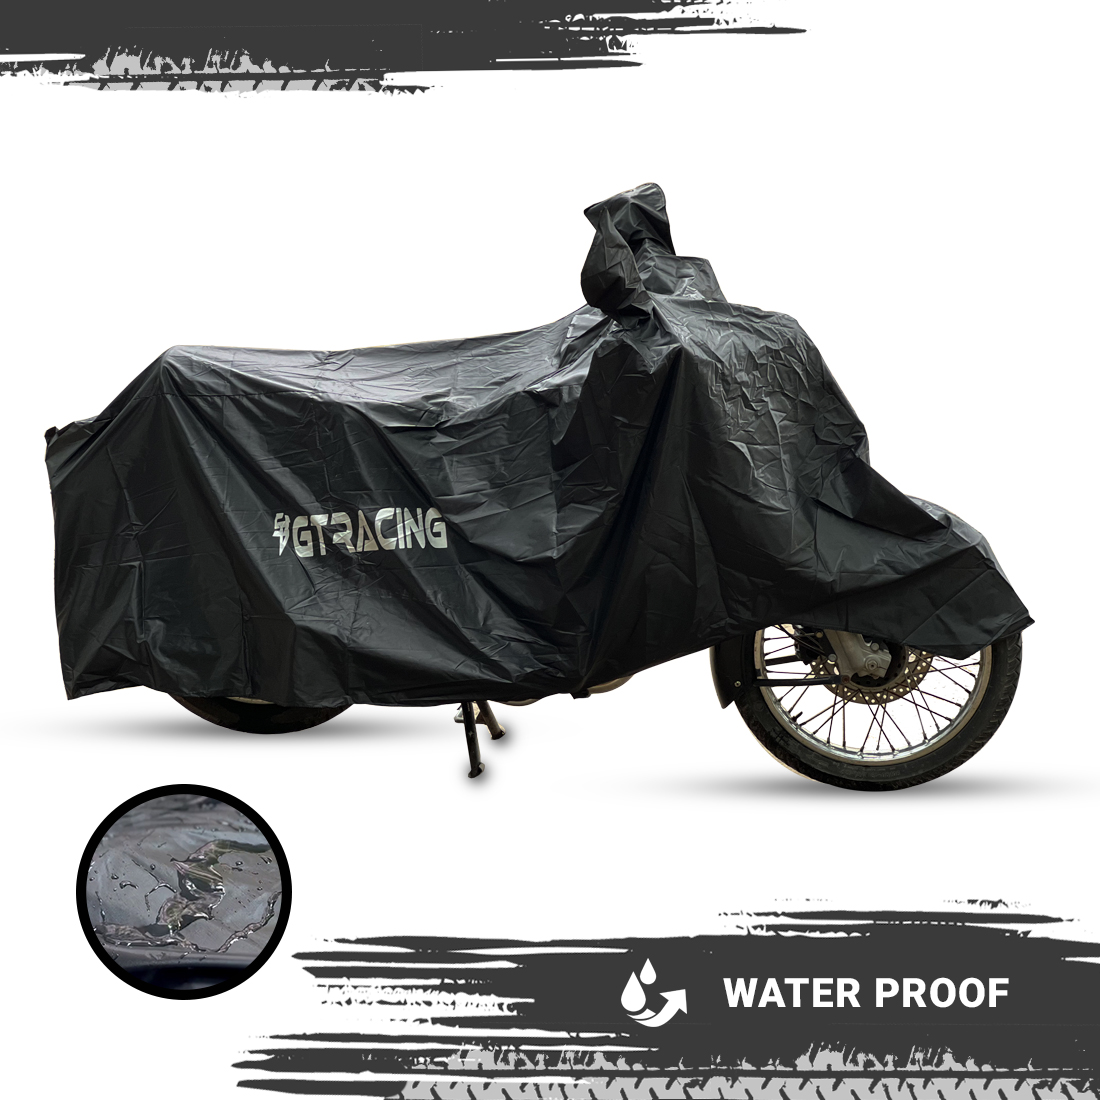 Steelbird 100% Waterproof Bike Cover GT Racing UV Protection Water-Resistant & Dustproof (Black PVC), Bike Body Cover With Carry Bag (All Scooter Activa Electric Scooty Size)